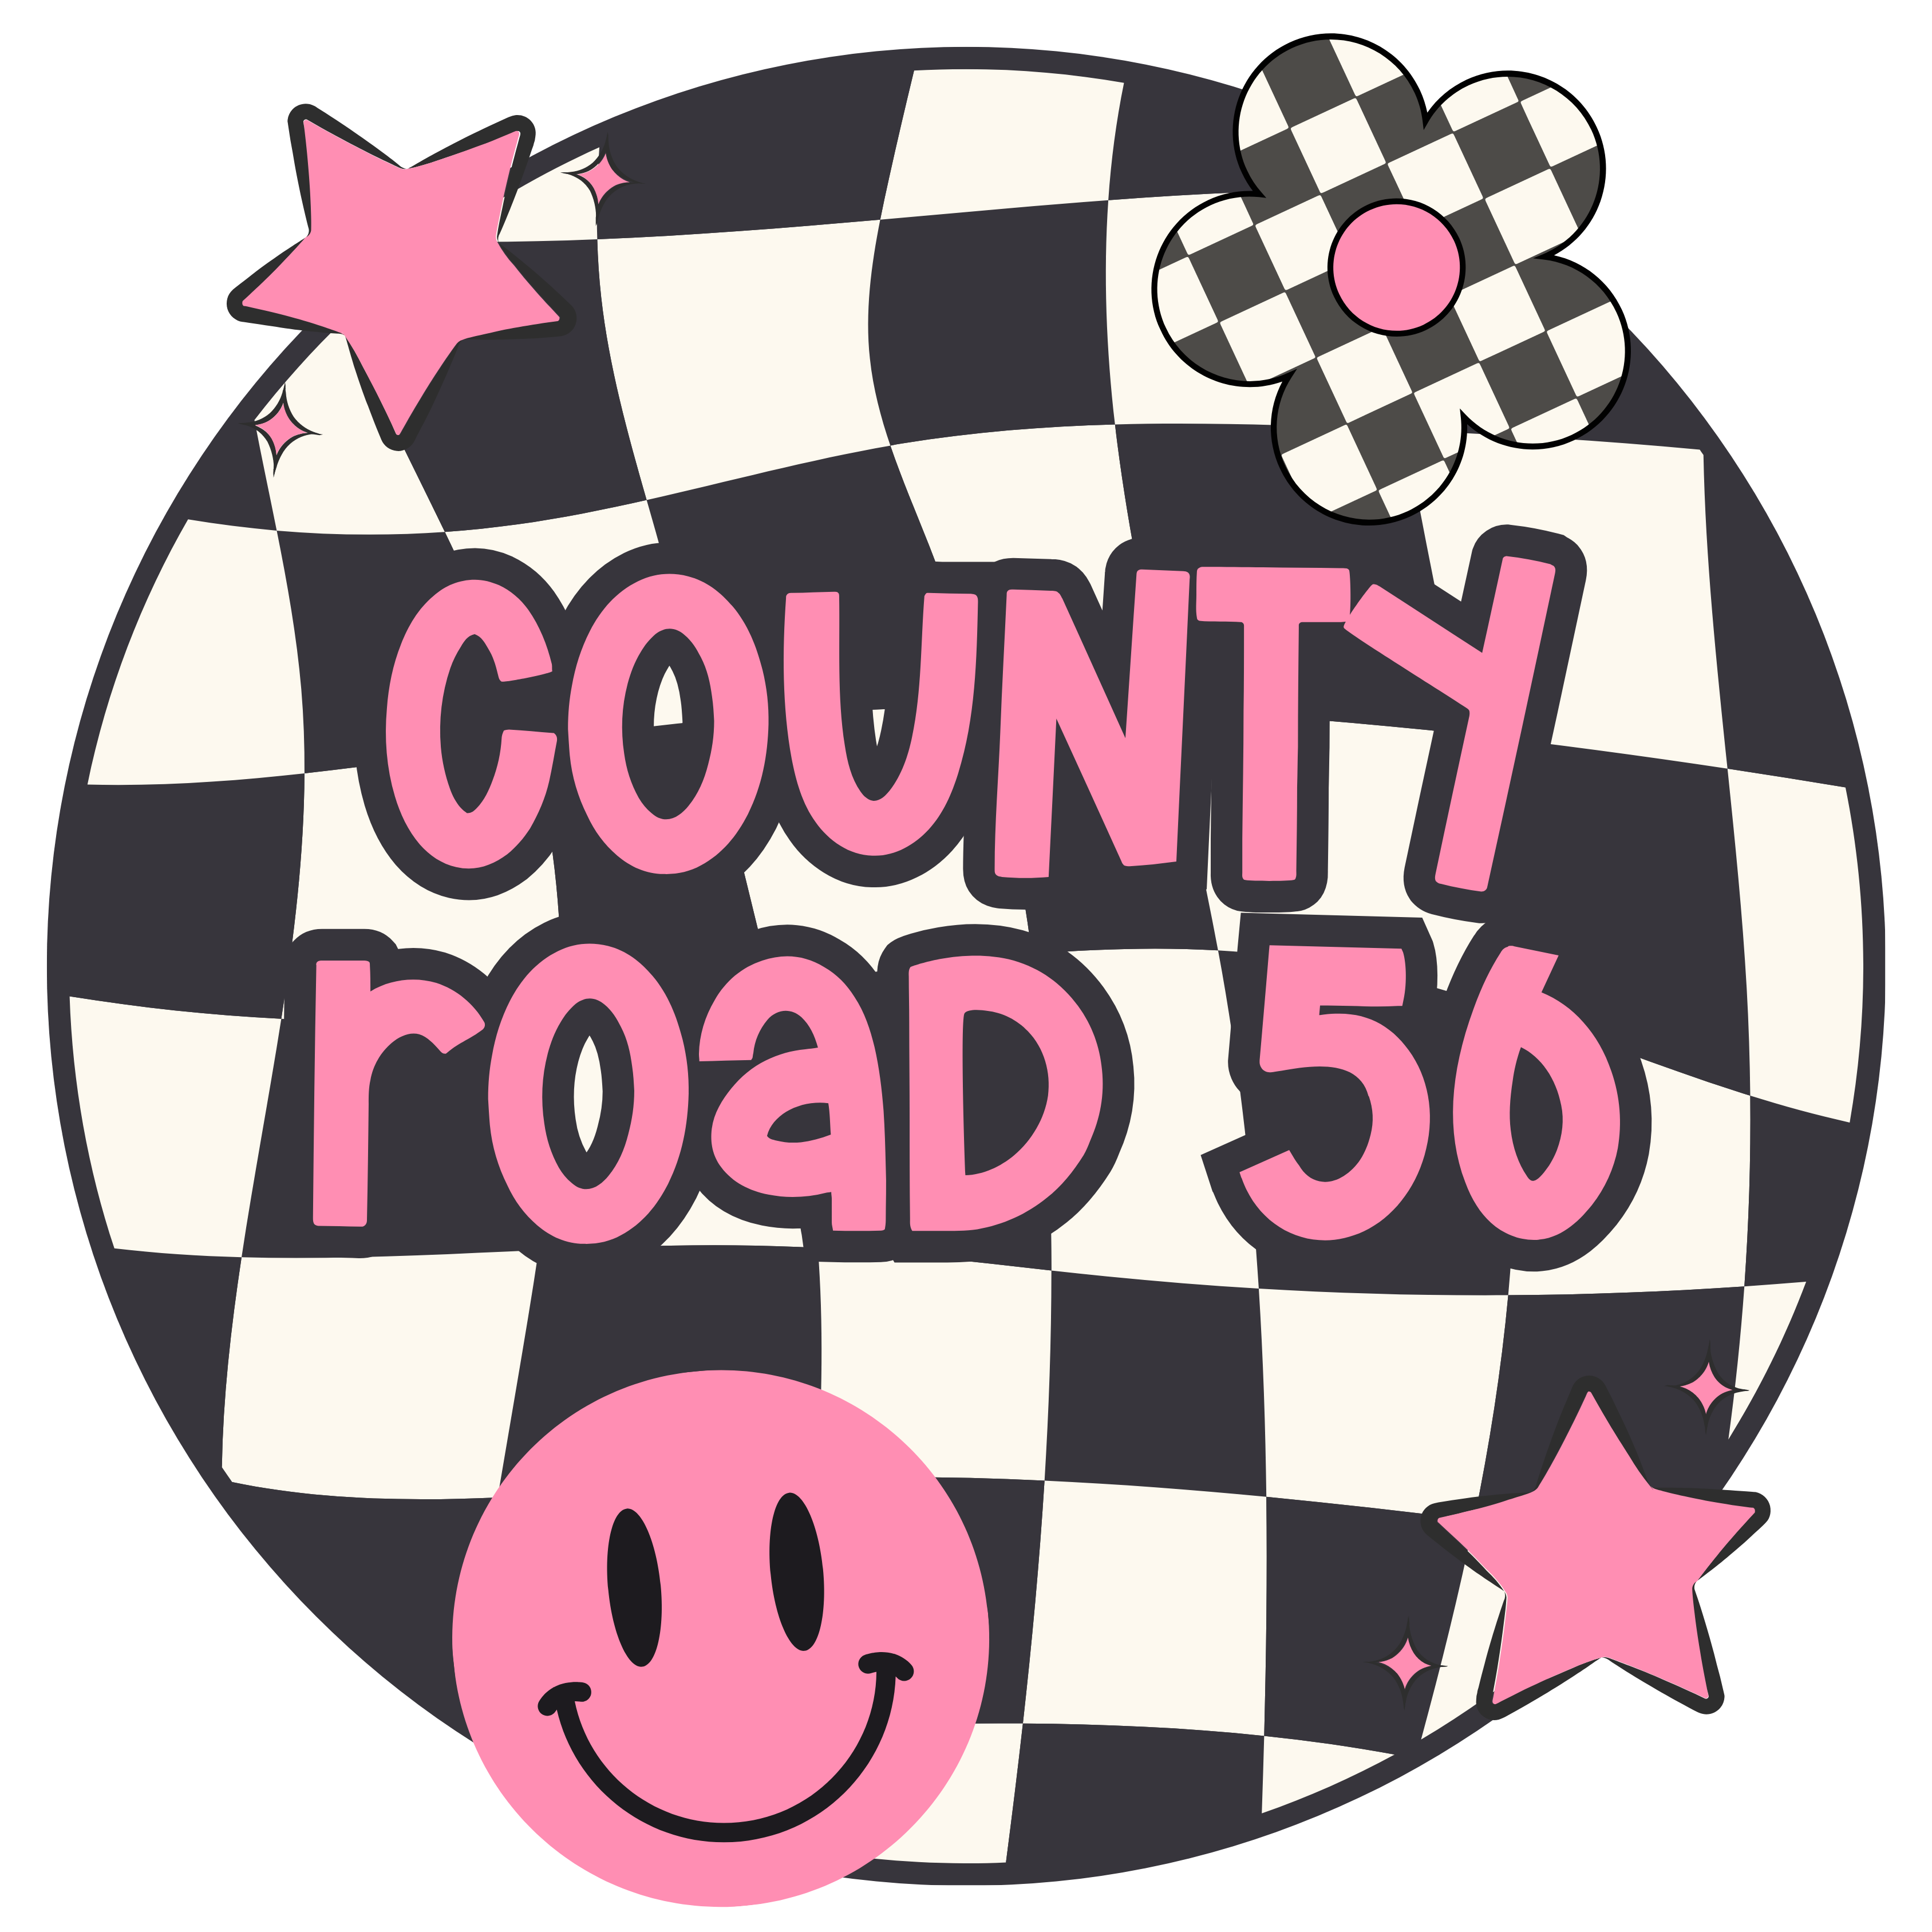 County Road 56